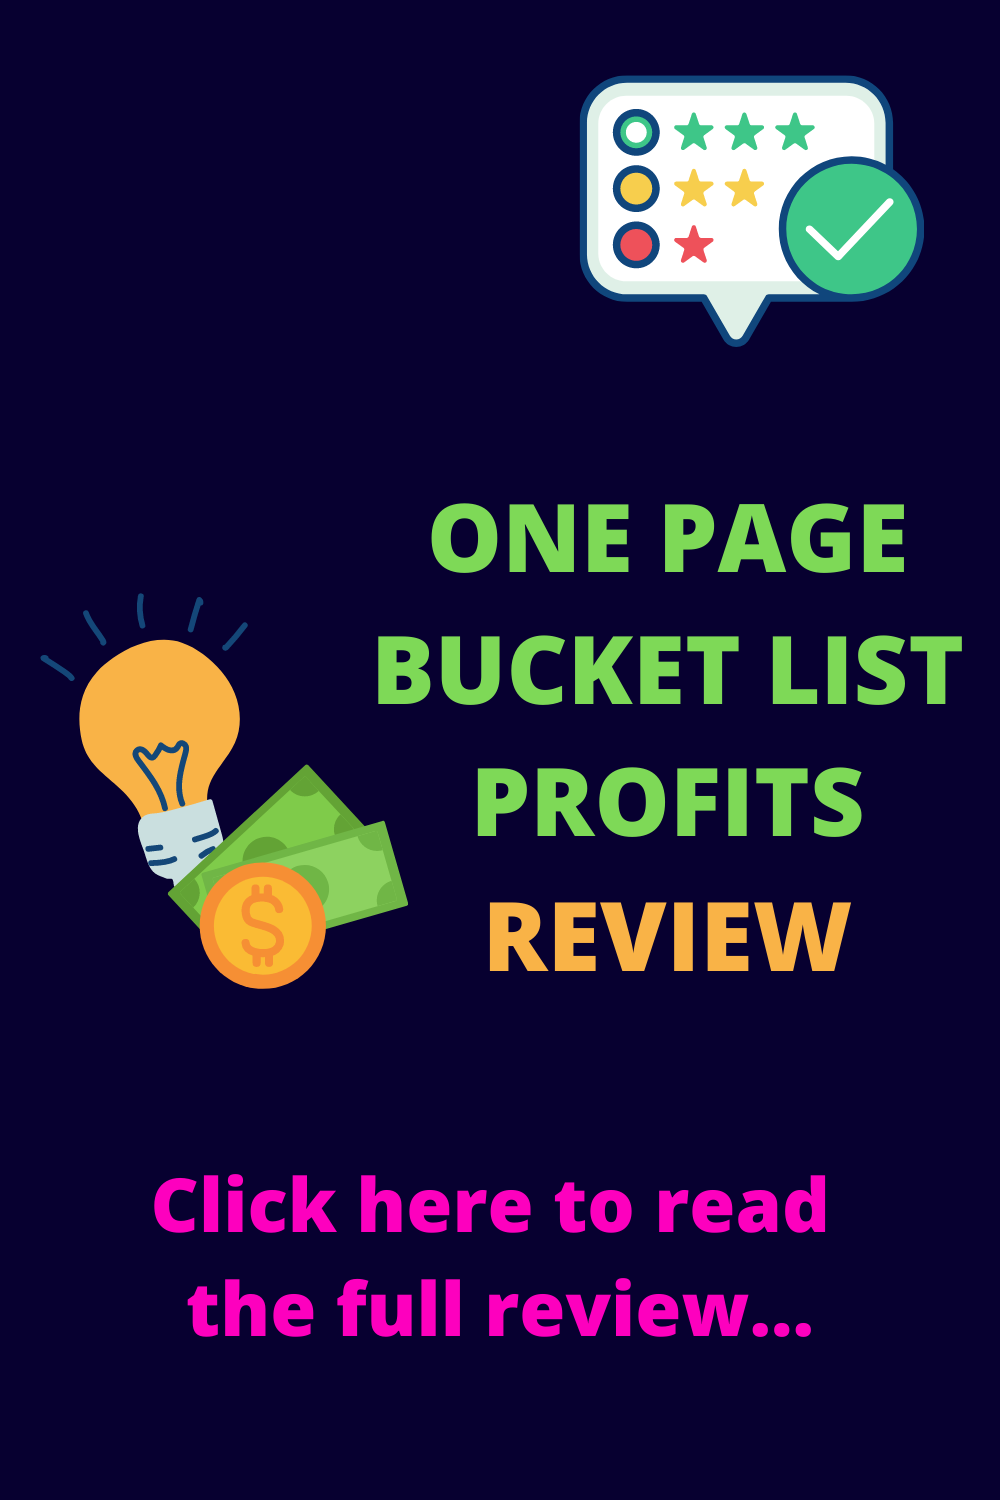 One Page Bucket List Profits Review